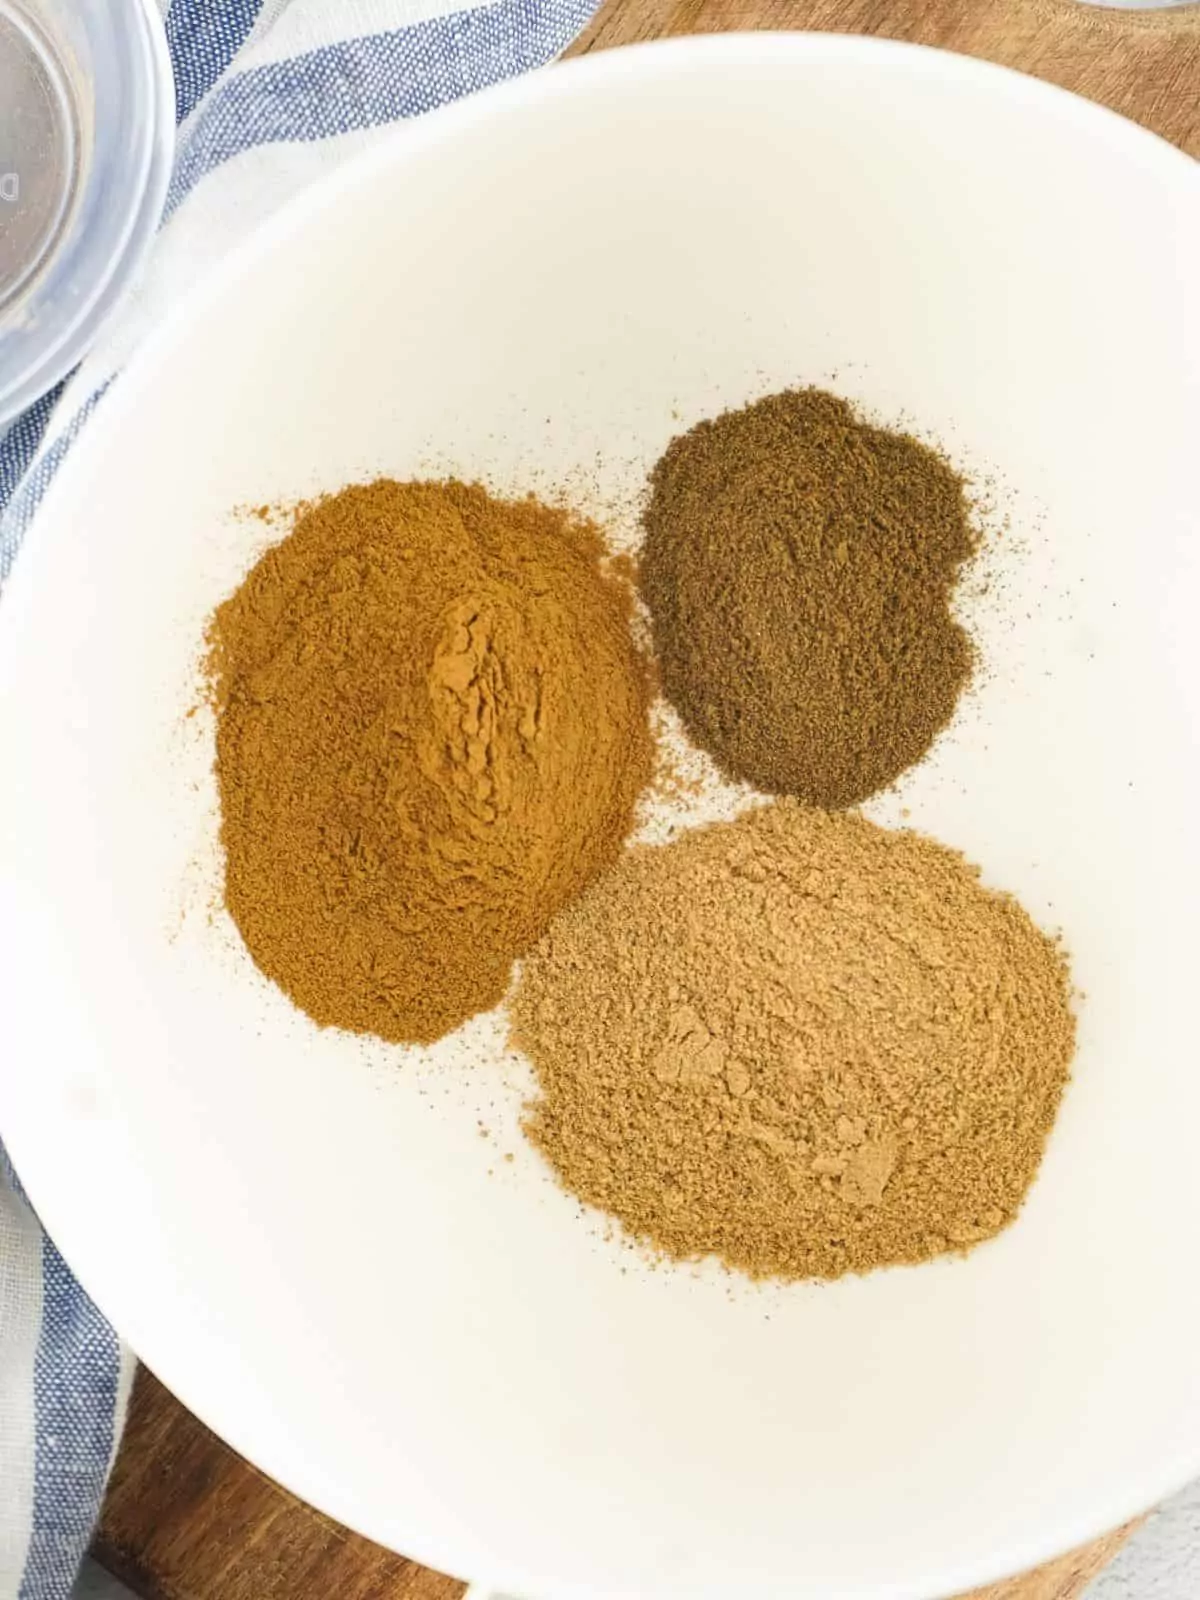 ingredients for allspice on white plate.